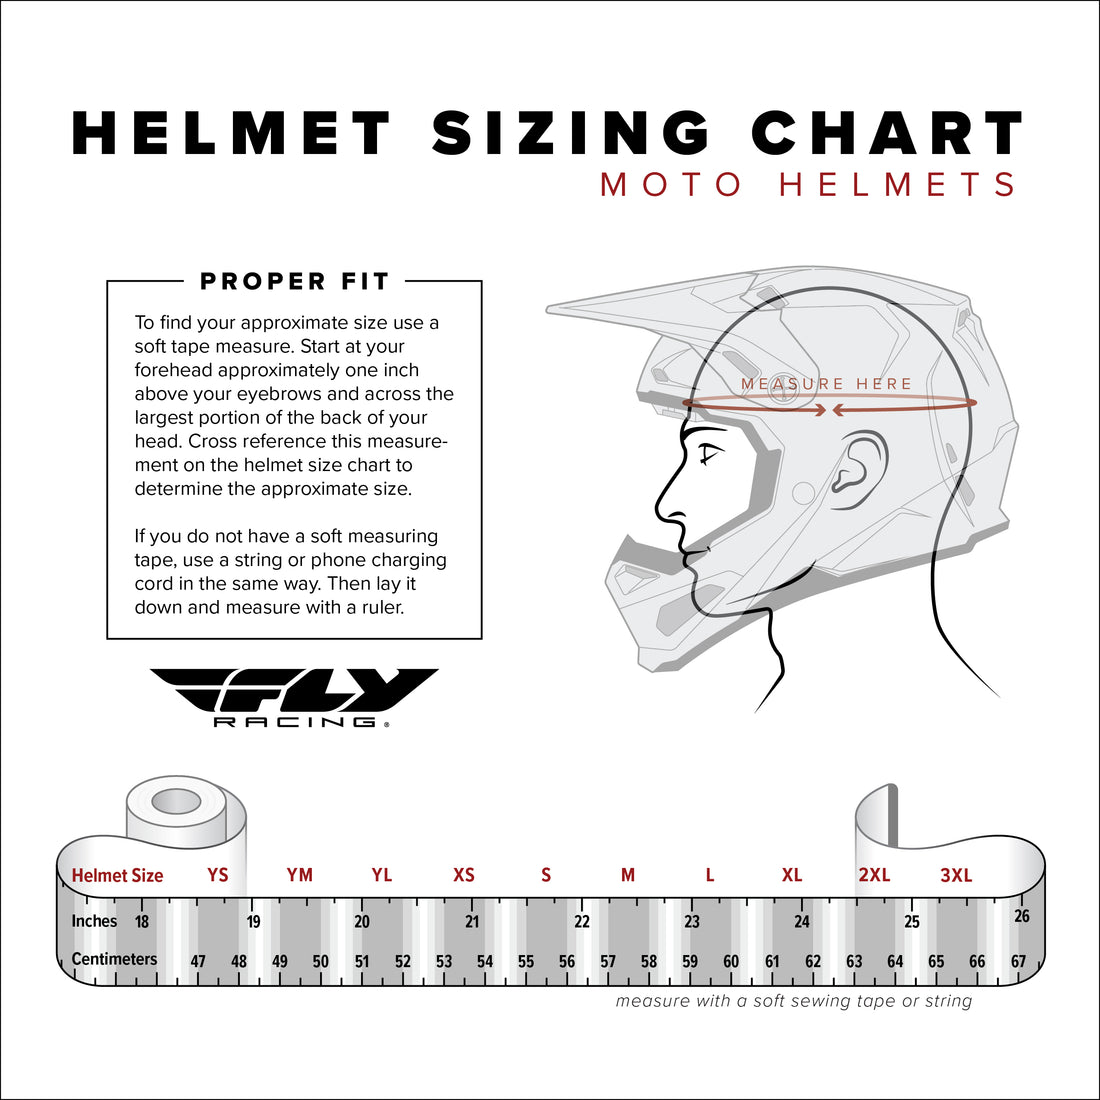 Fly Racing Formula CP Solid Helm 2022